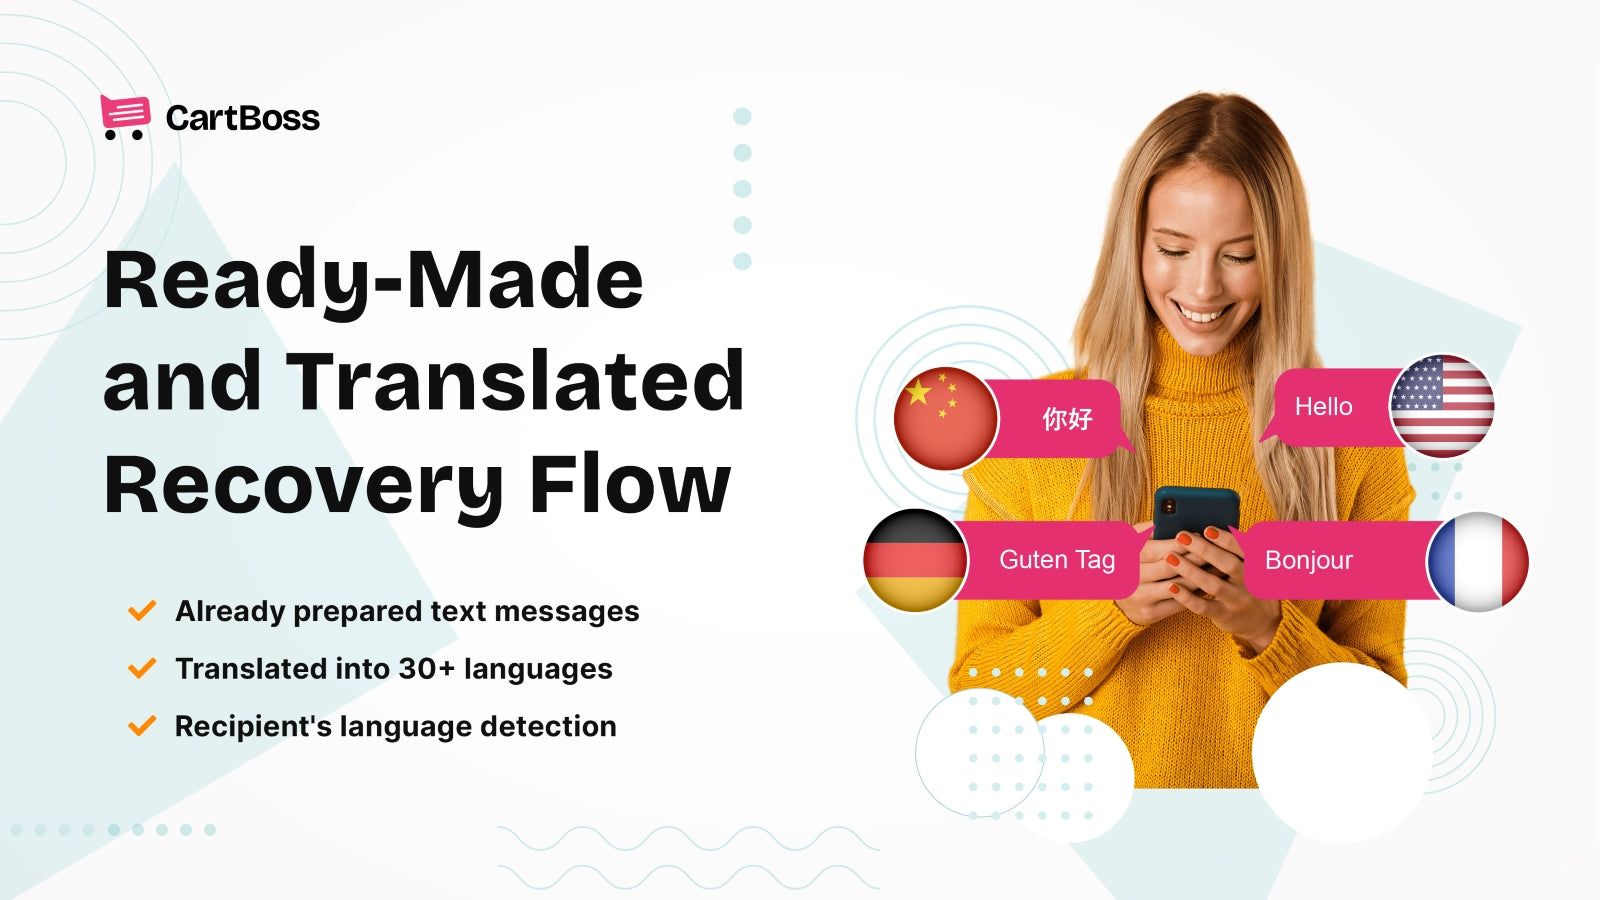 Ready-Made and Translated SMS Recovery Flow